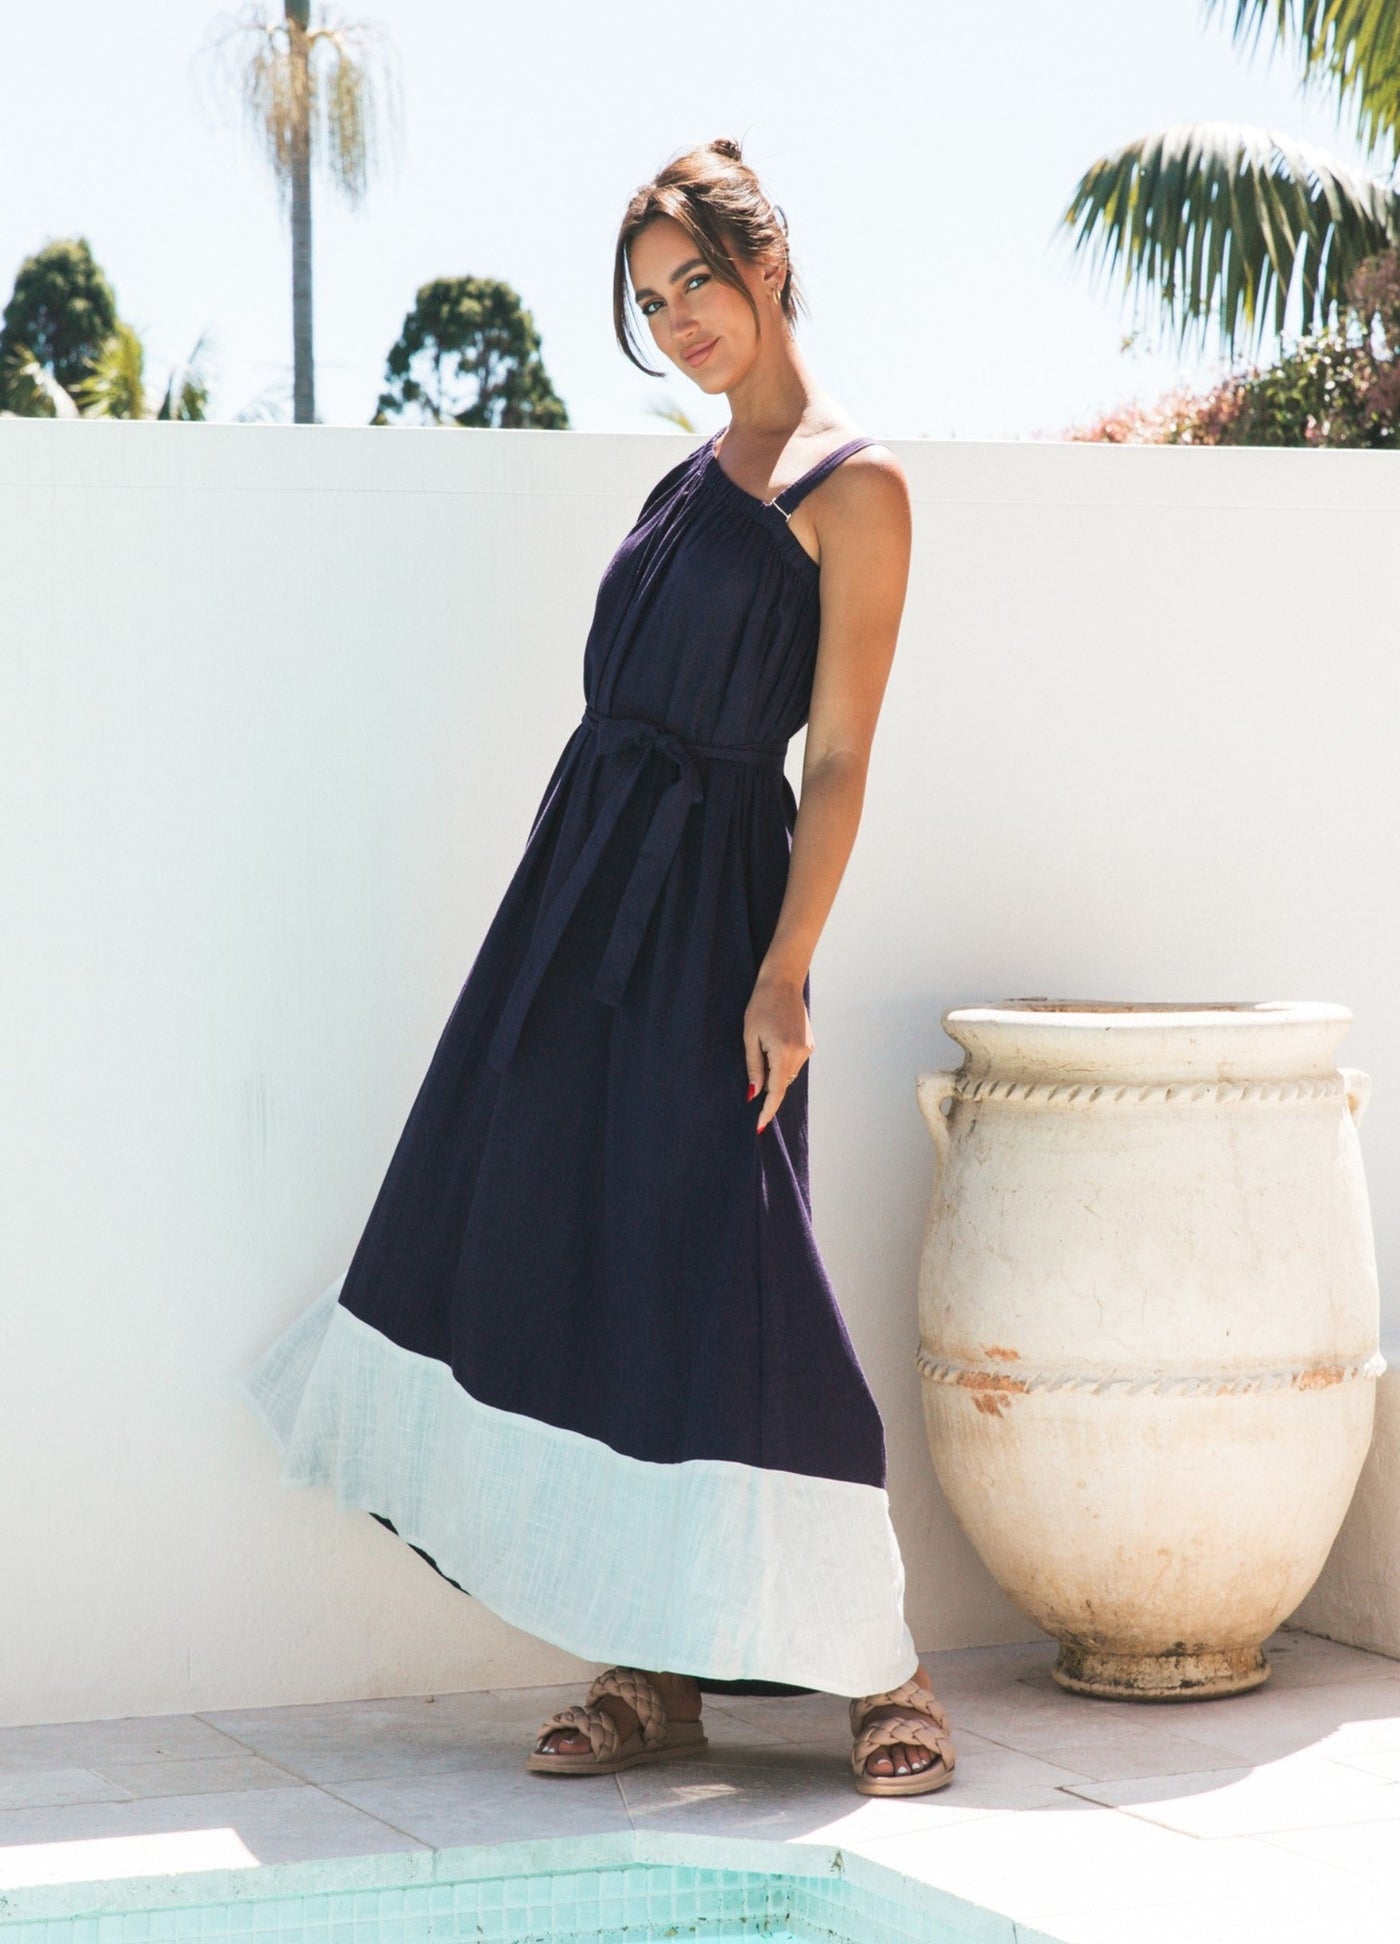 Navy and white Maxi Dress from Label of Love